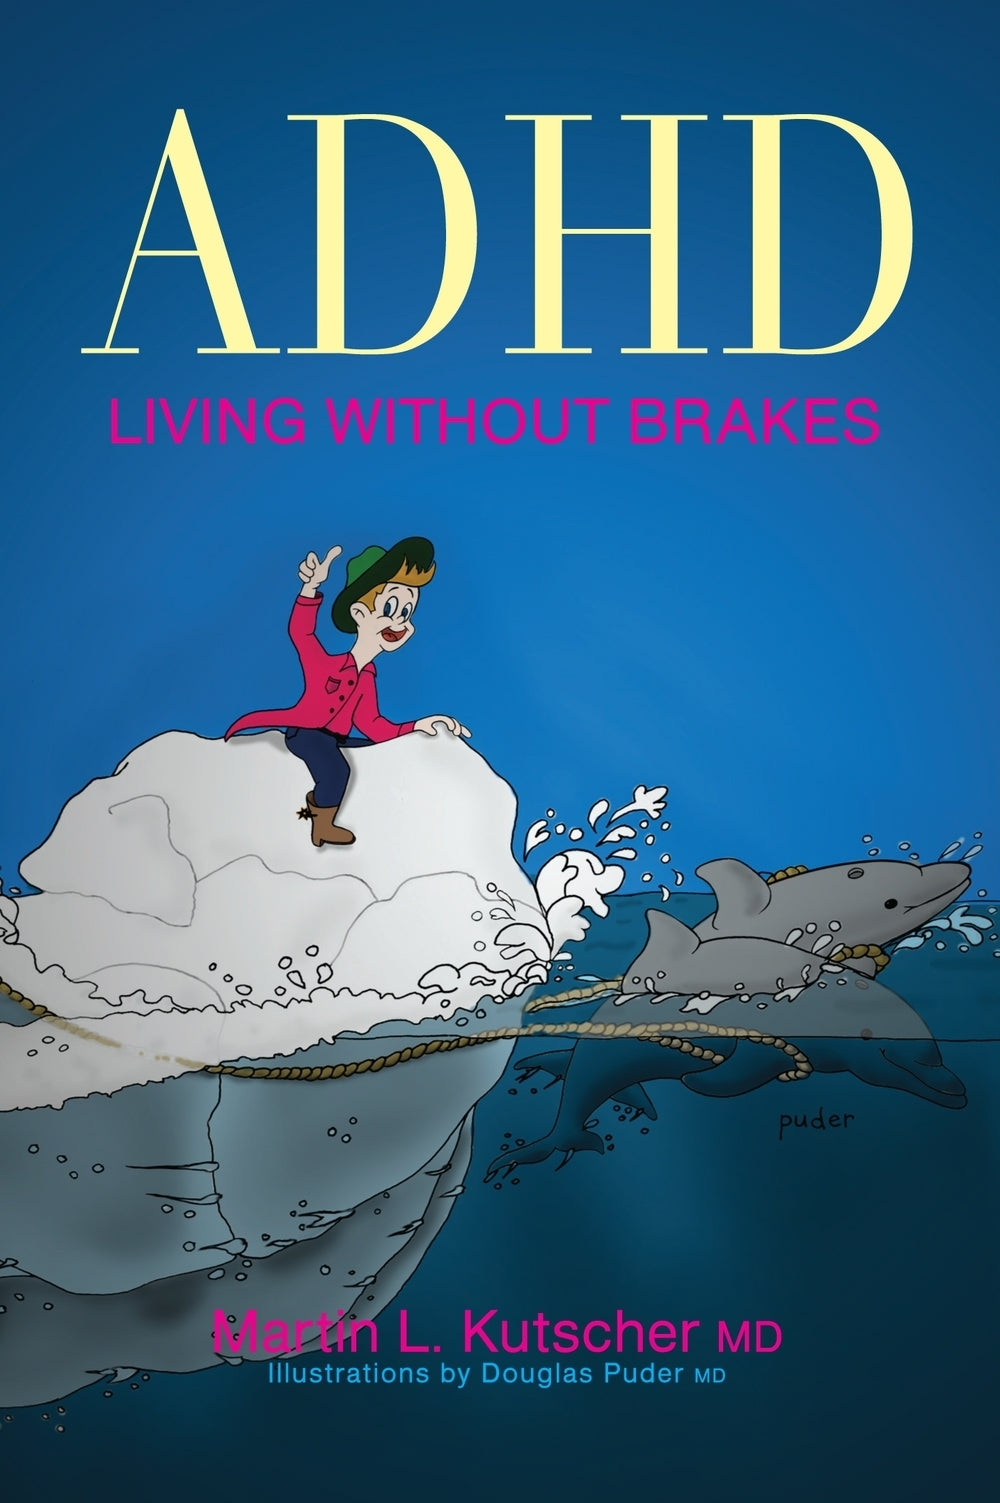 ADHD - Living without Brakes by Martin L. Kutscher